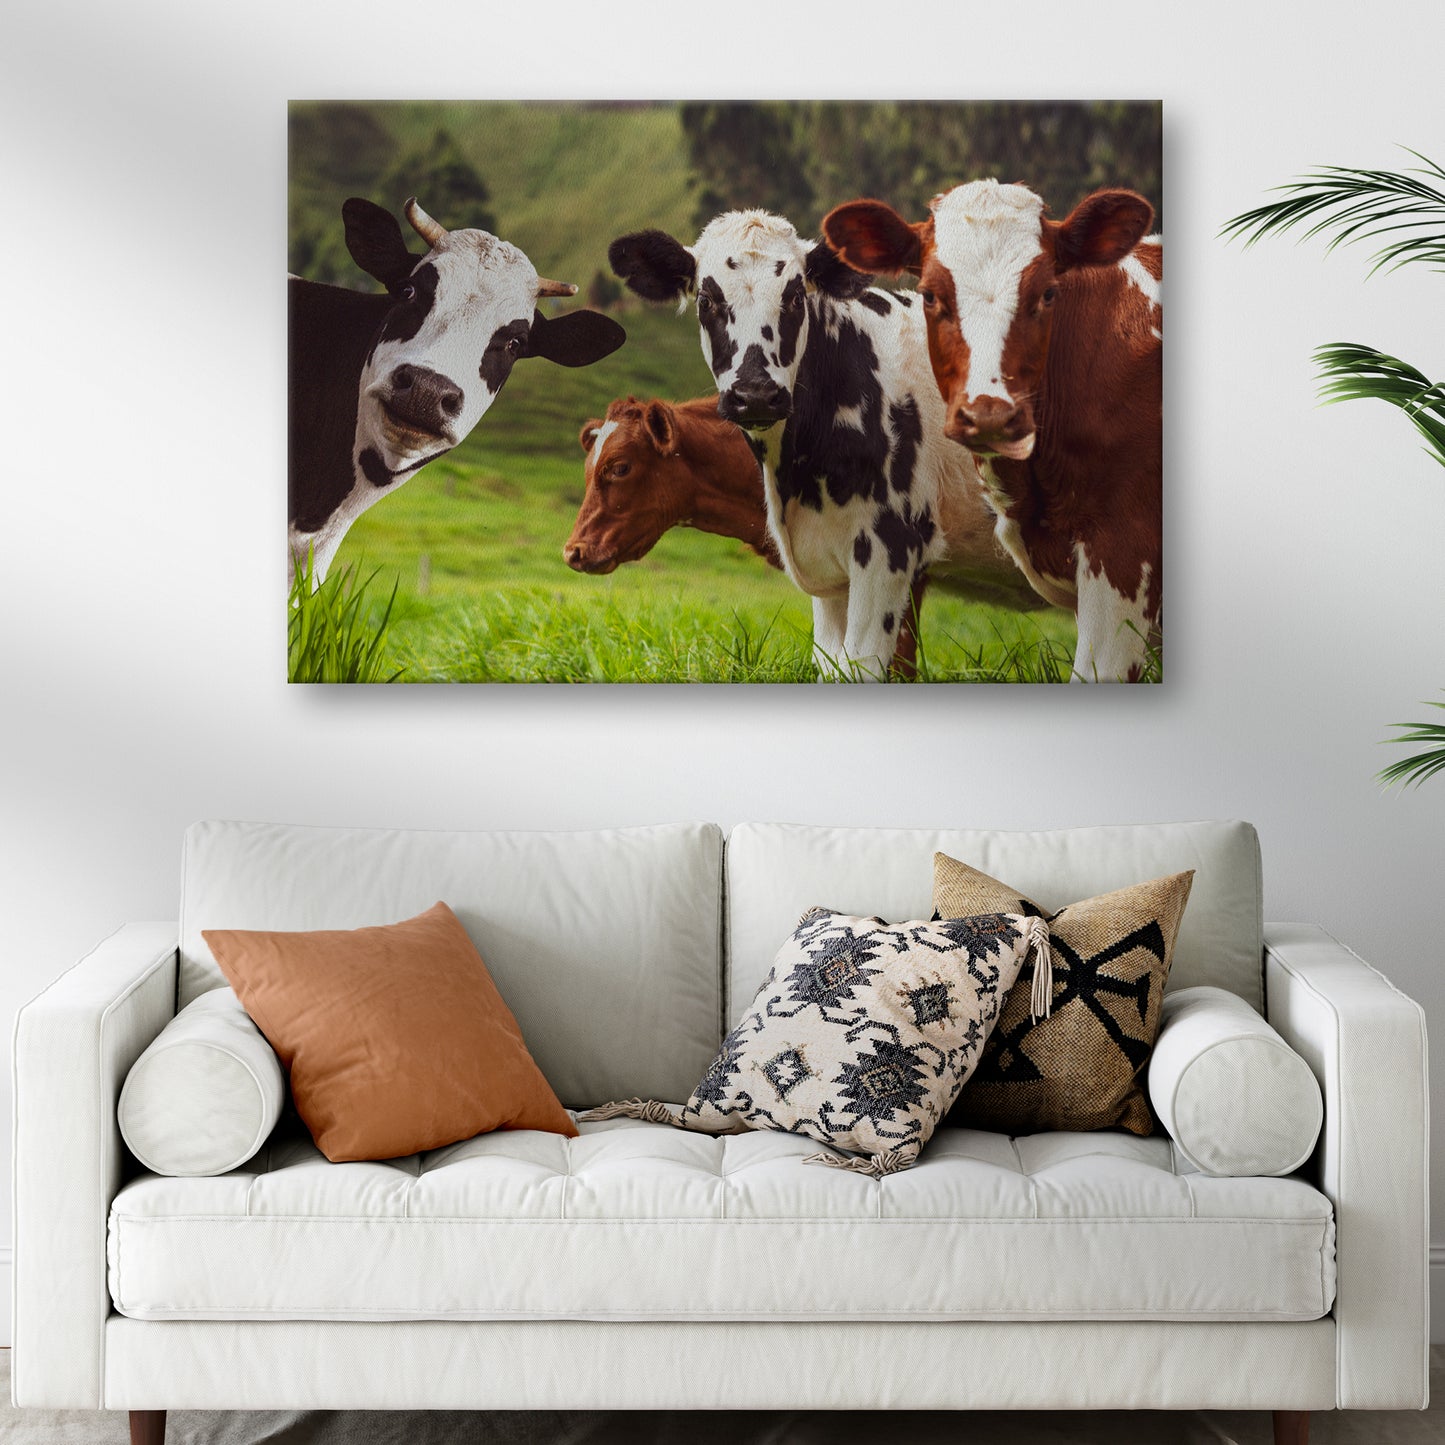 Lovely Cattles On Prairie Canvas Wall Art - Image by Tailored Canvases